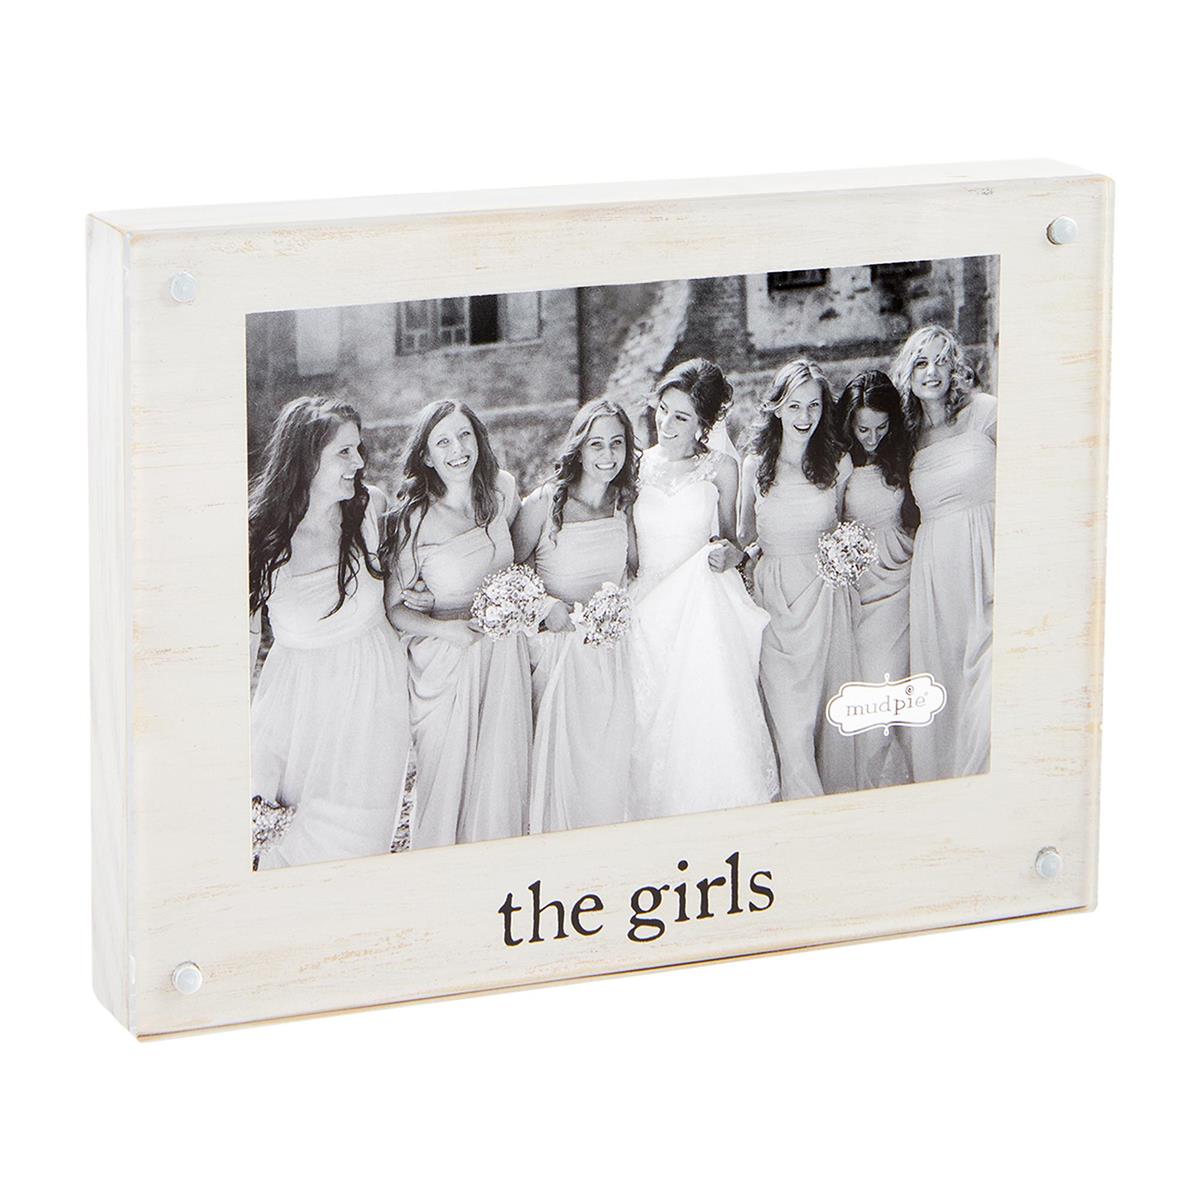 A white magnetic block picture frame that reads "the girls" at the bottom, from the brand: Mud Pie.